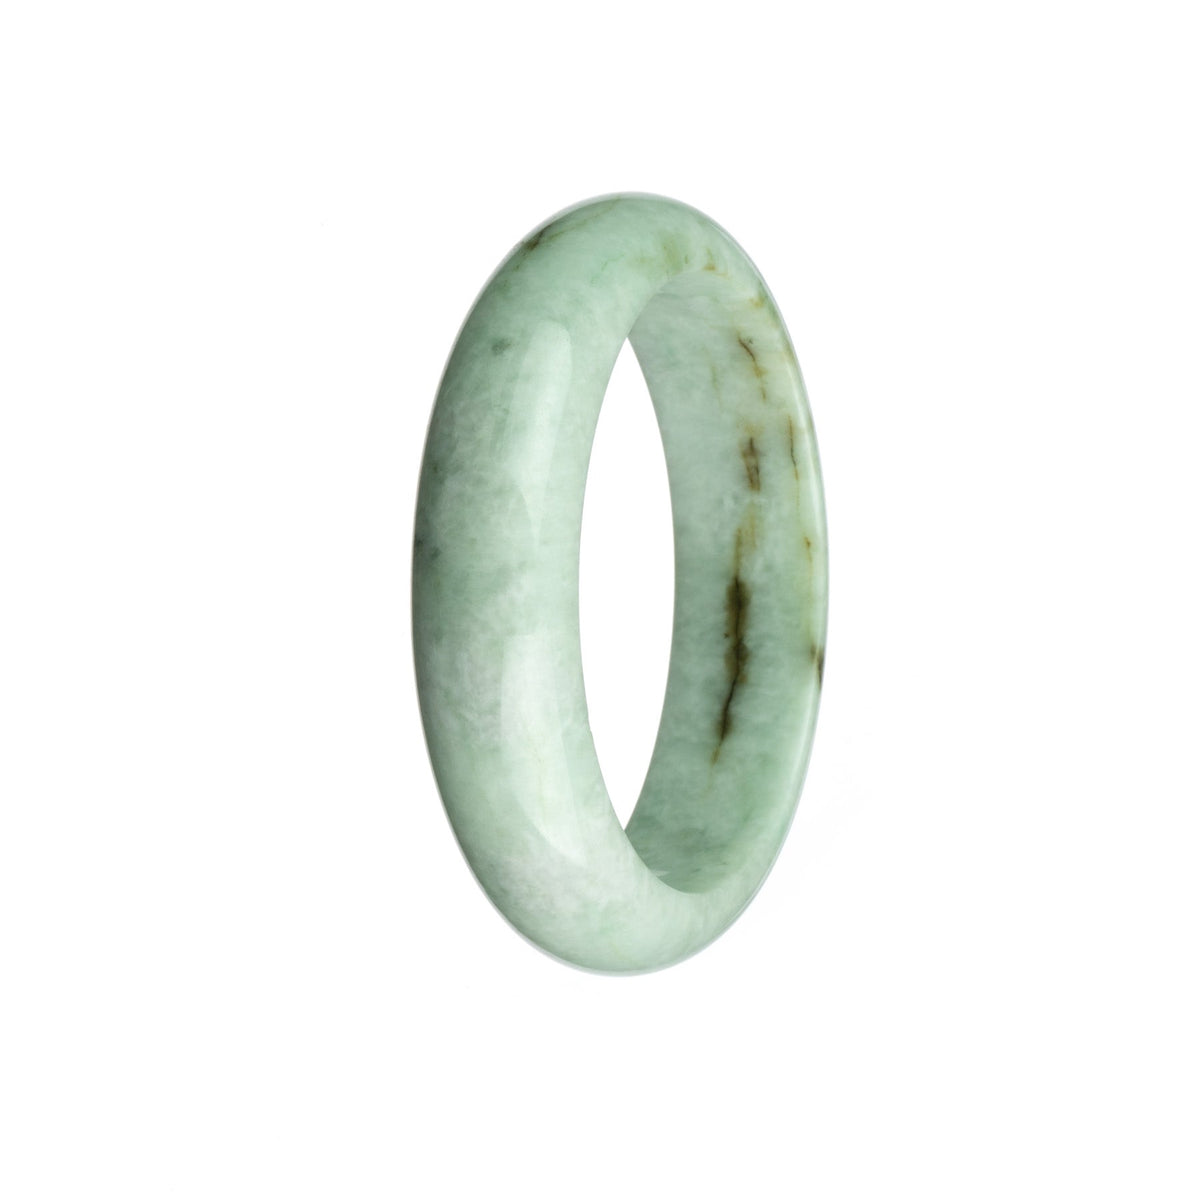 A pale green jadeite bangle bracelet with a half moon design, measuring 57mm in size.